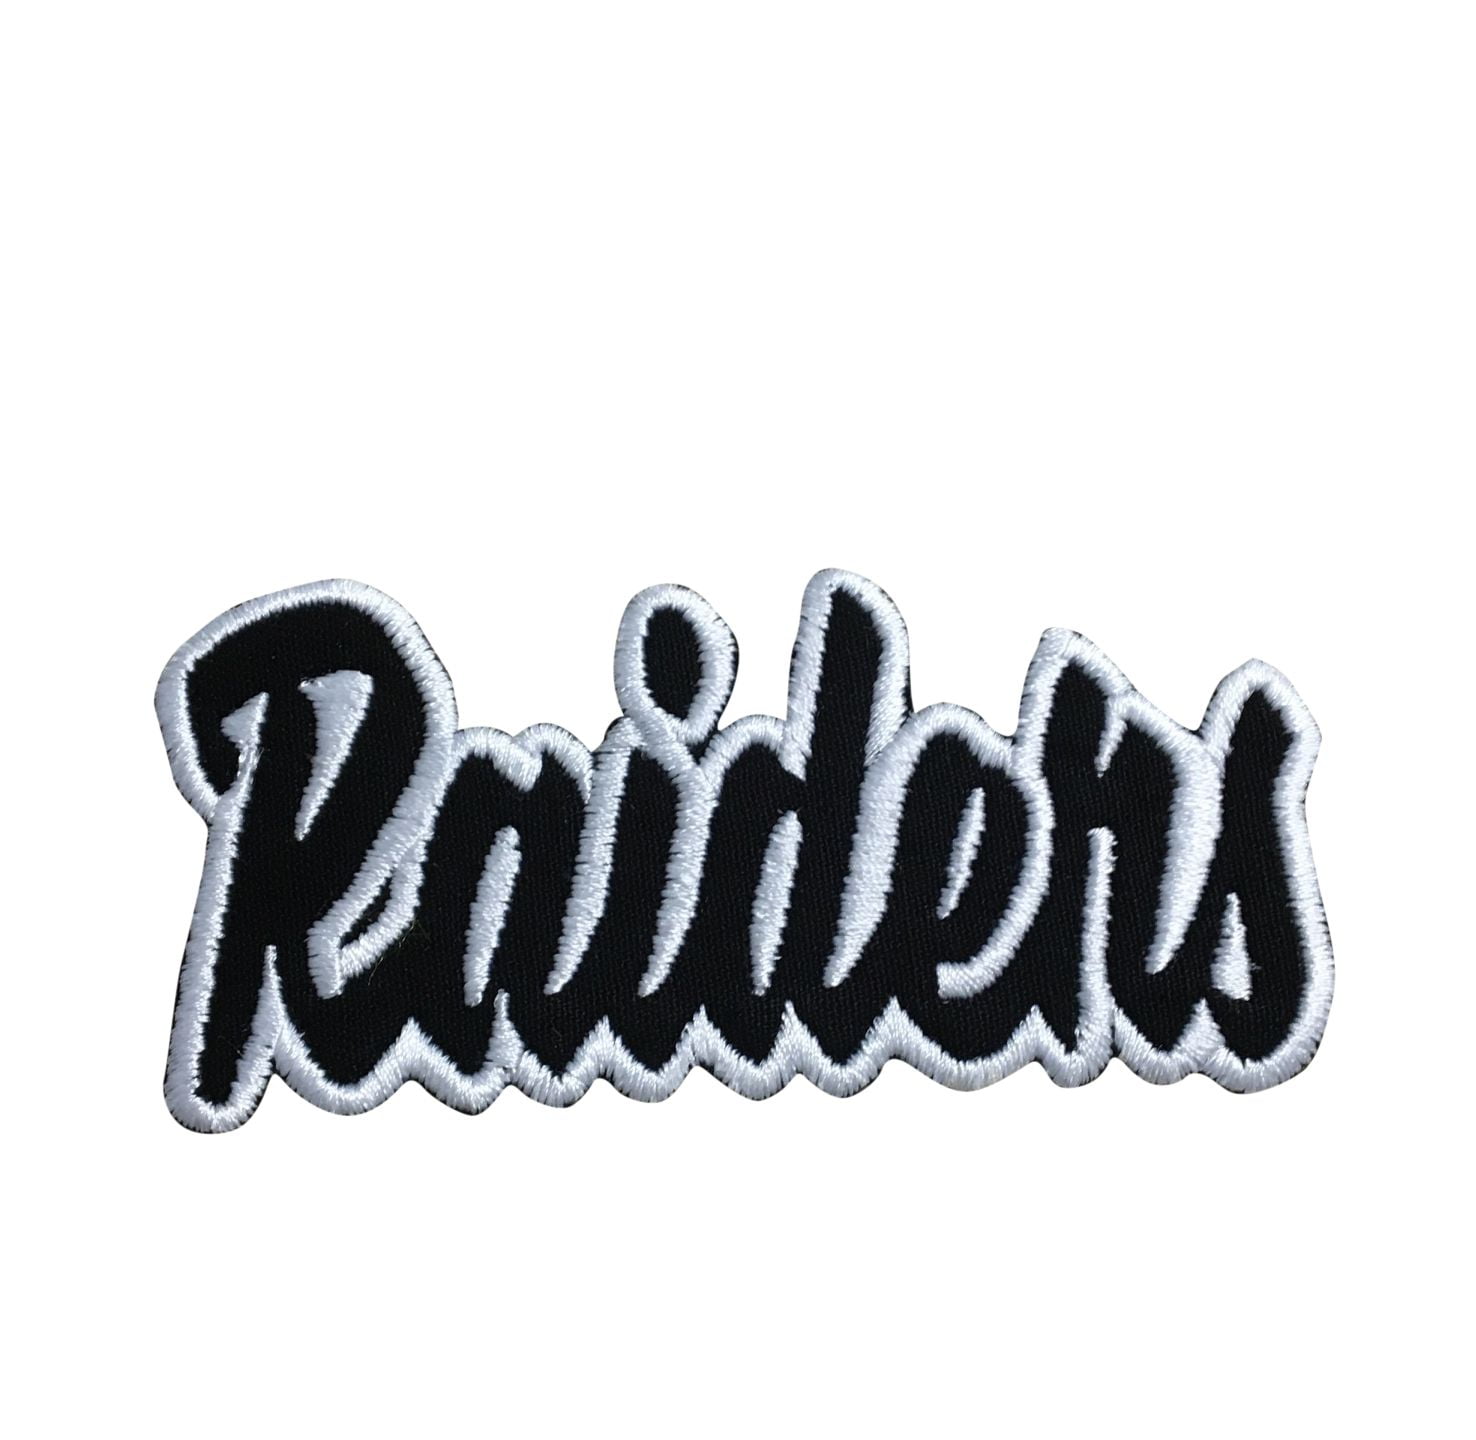 Raiders - Black/White - Team Mascot - Words/Names - Iron on  Applique/Embroidered Patch 